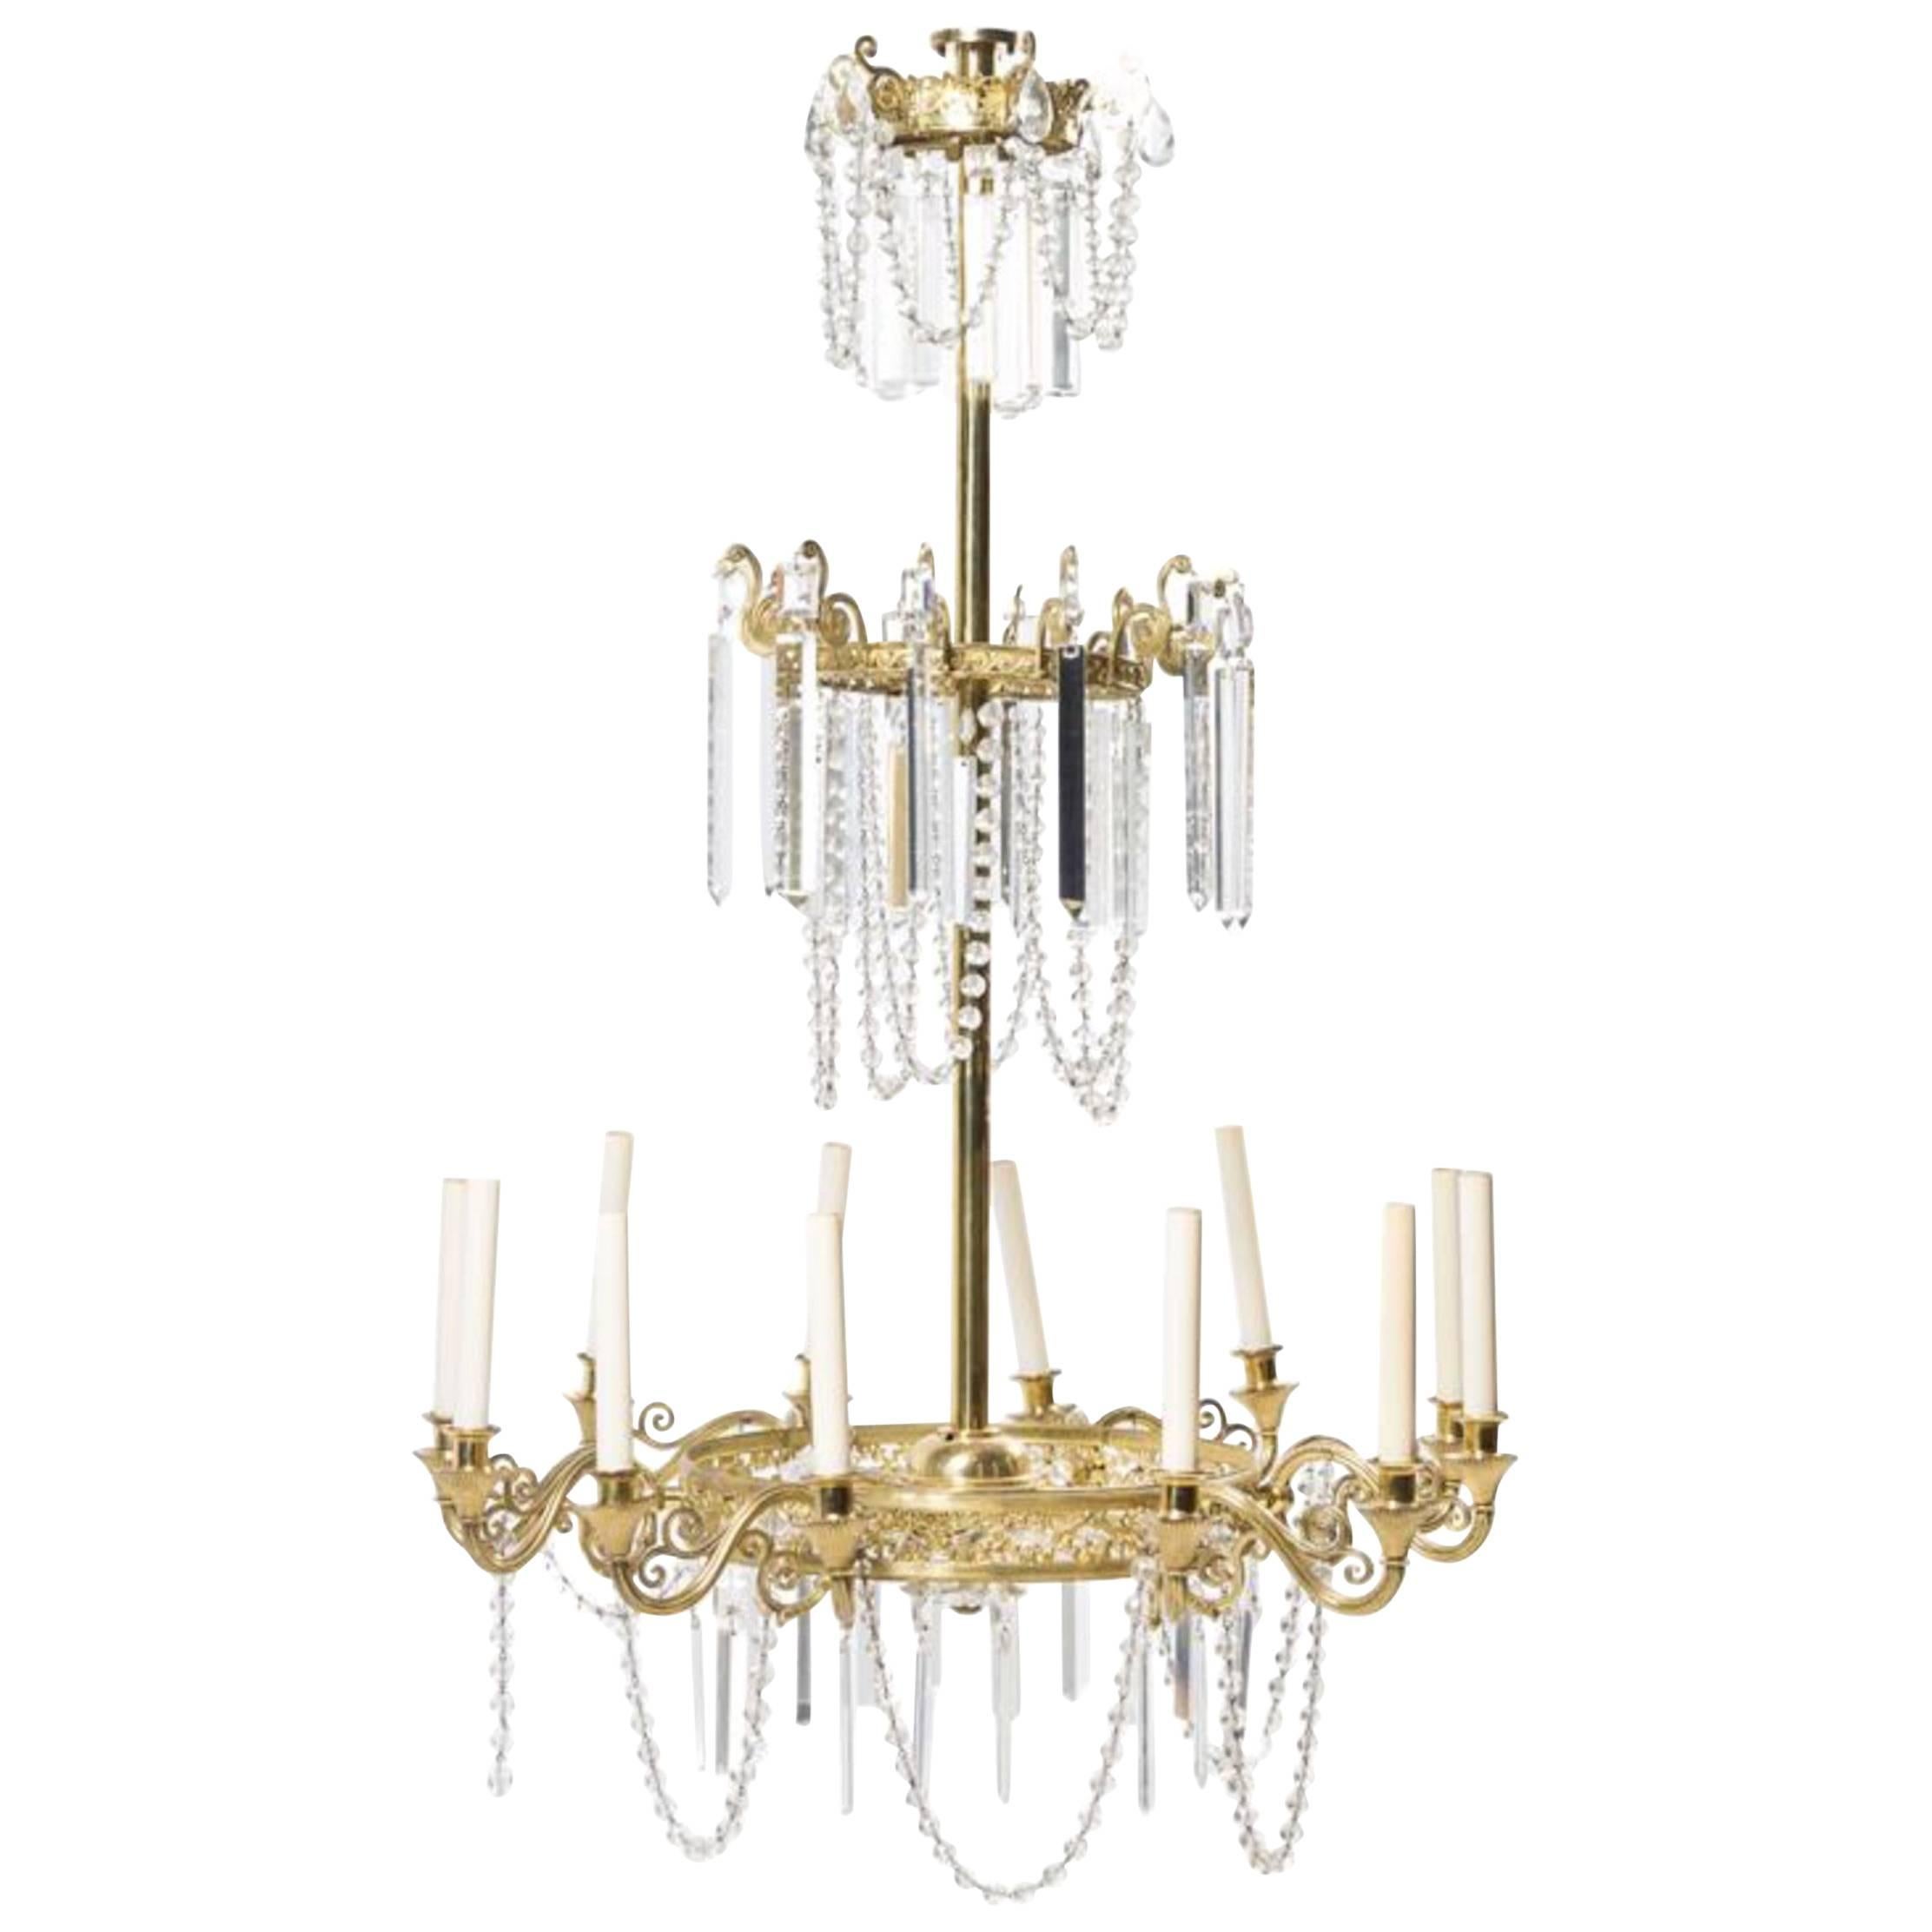 Neoclassical Style Gilt Bronze Twelve-Light Crystal Chandelier.  Great scale. For Sale